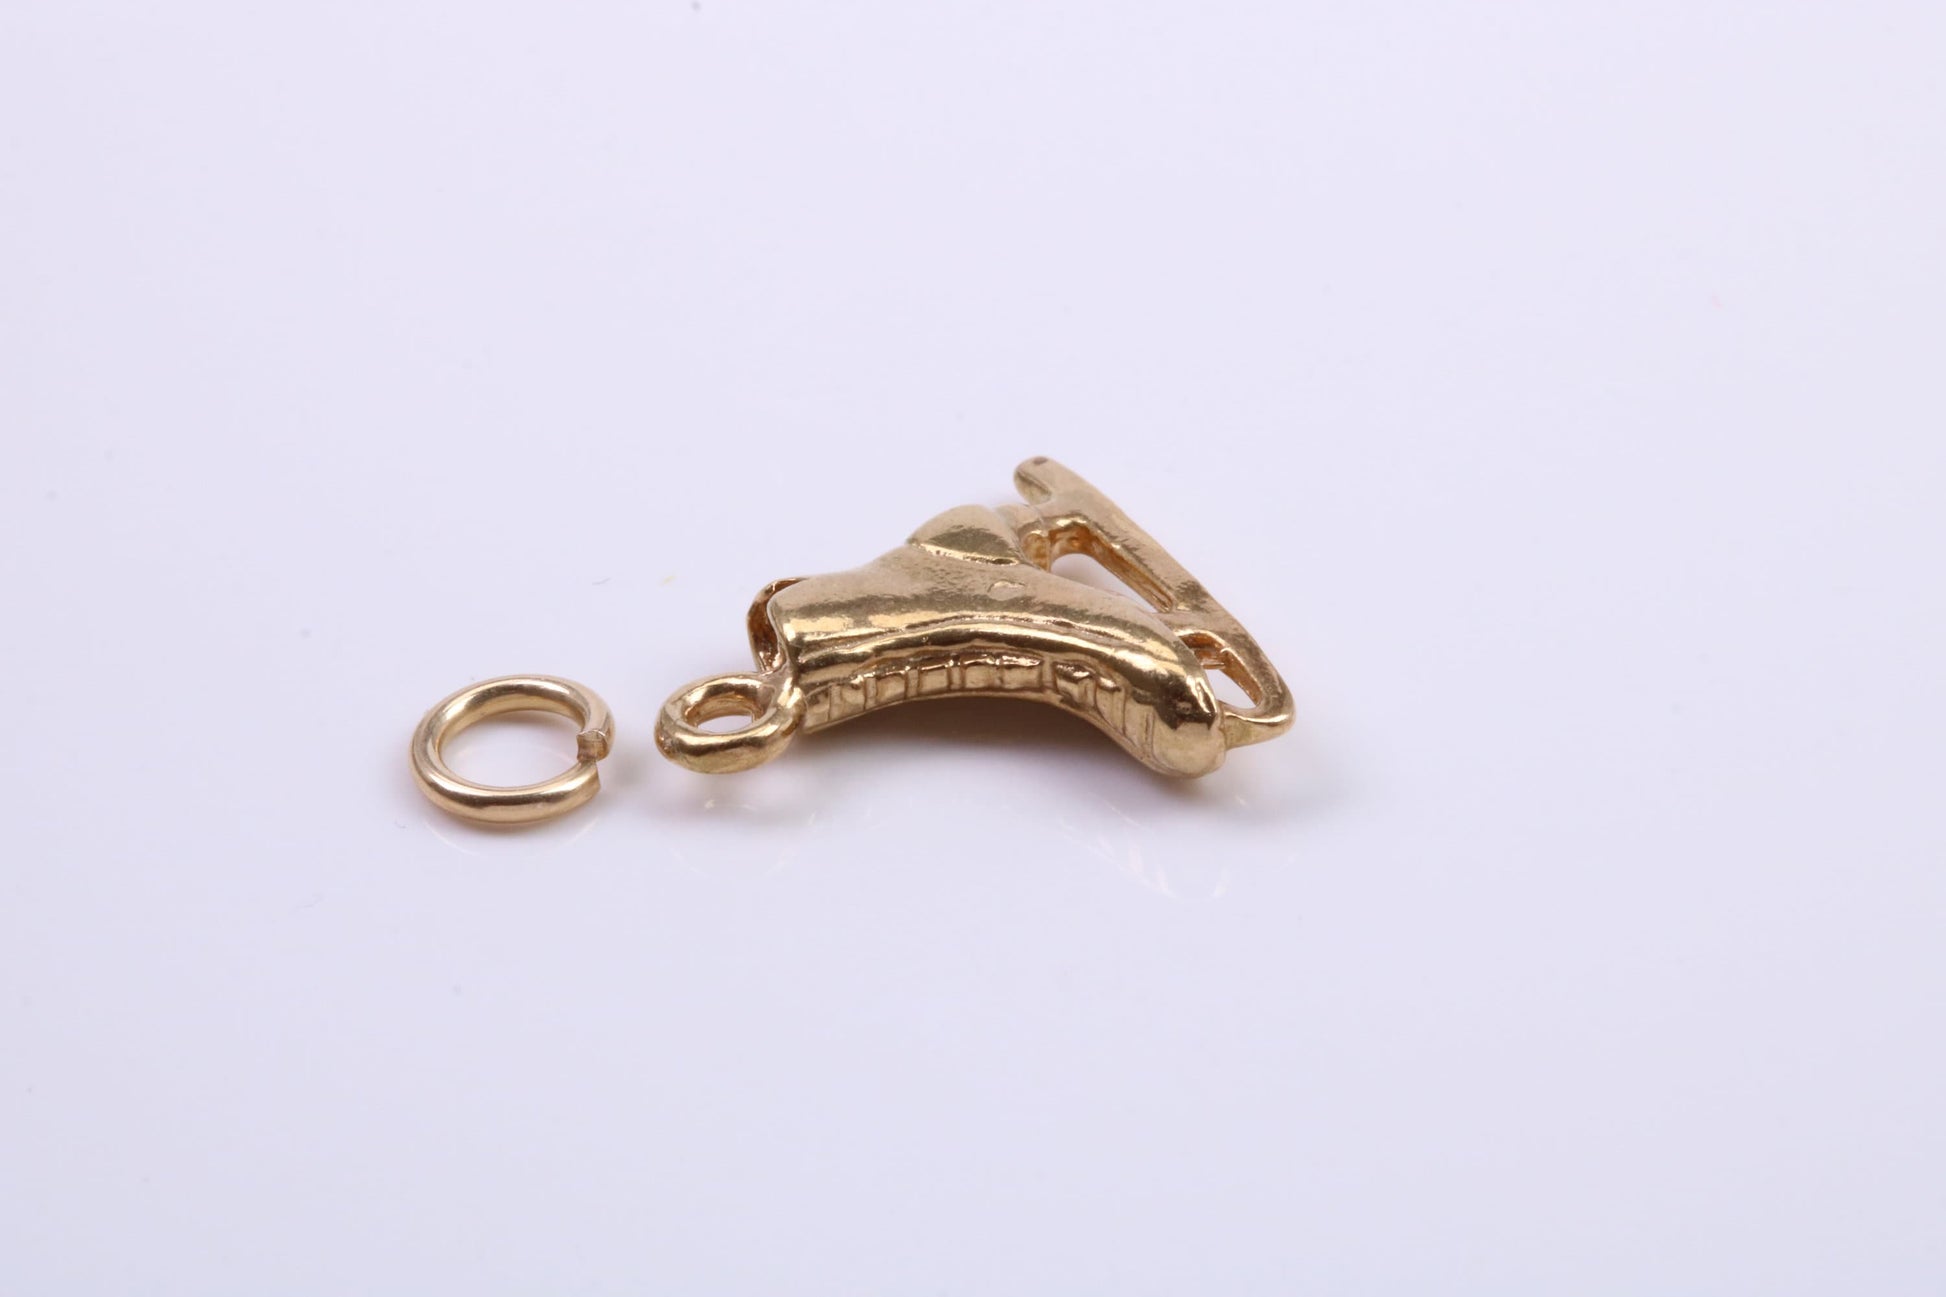 Ice Skate Charm, Traditional Charm, Made from Solid 9ct Yellow Gold, British Hallmarked, Complete with Attachment Link